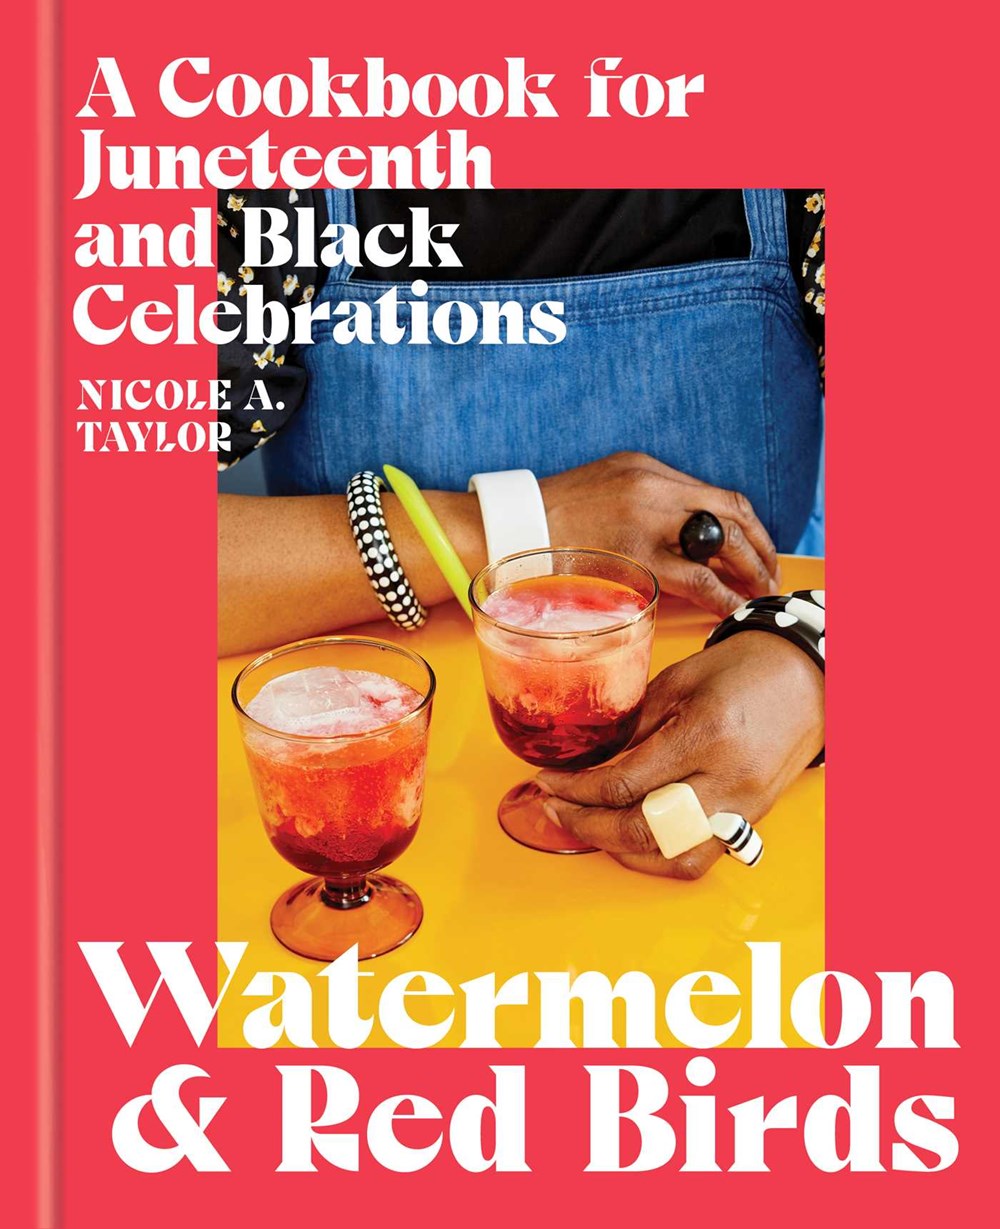 Watermelon & Red Birds: A Cookbook for Juneteenth and Black Celebrations by Nicole A. Taylor